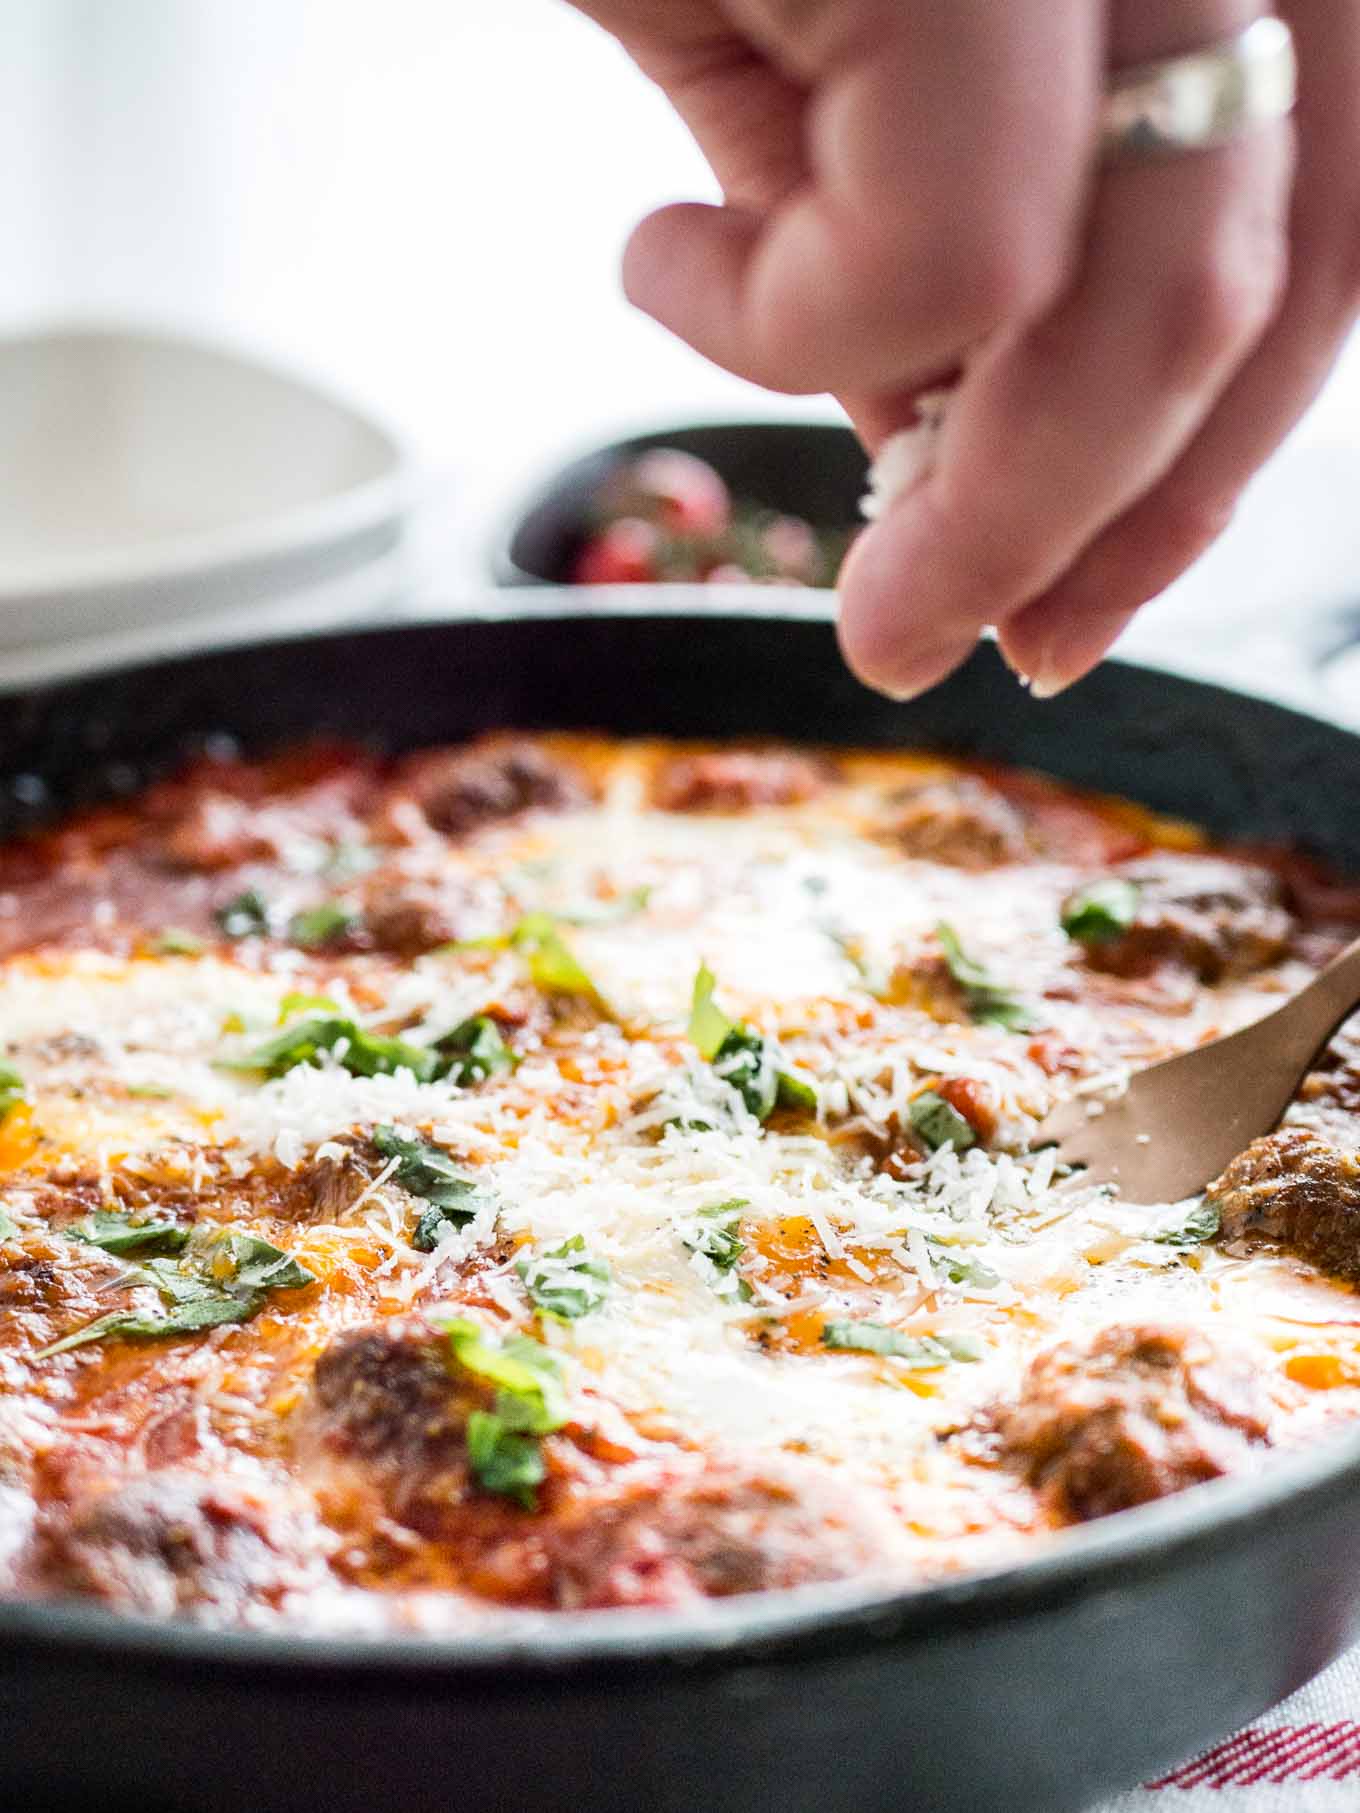 A hand crumbling Parmiggiano onto a cast iron pan of Italian baked eggs and meatballs with a bronze fork in it.